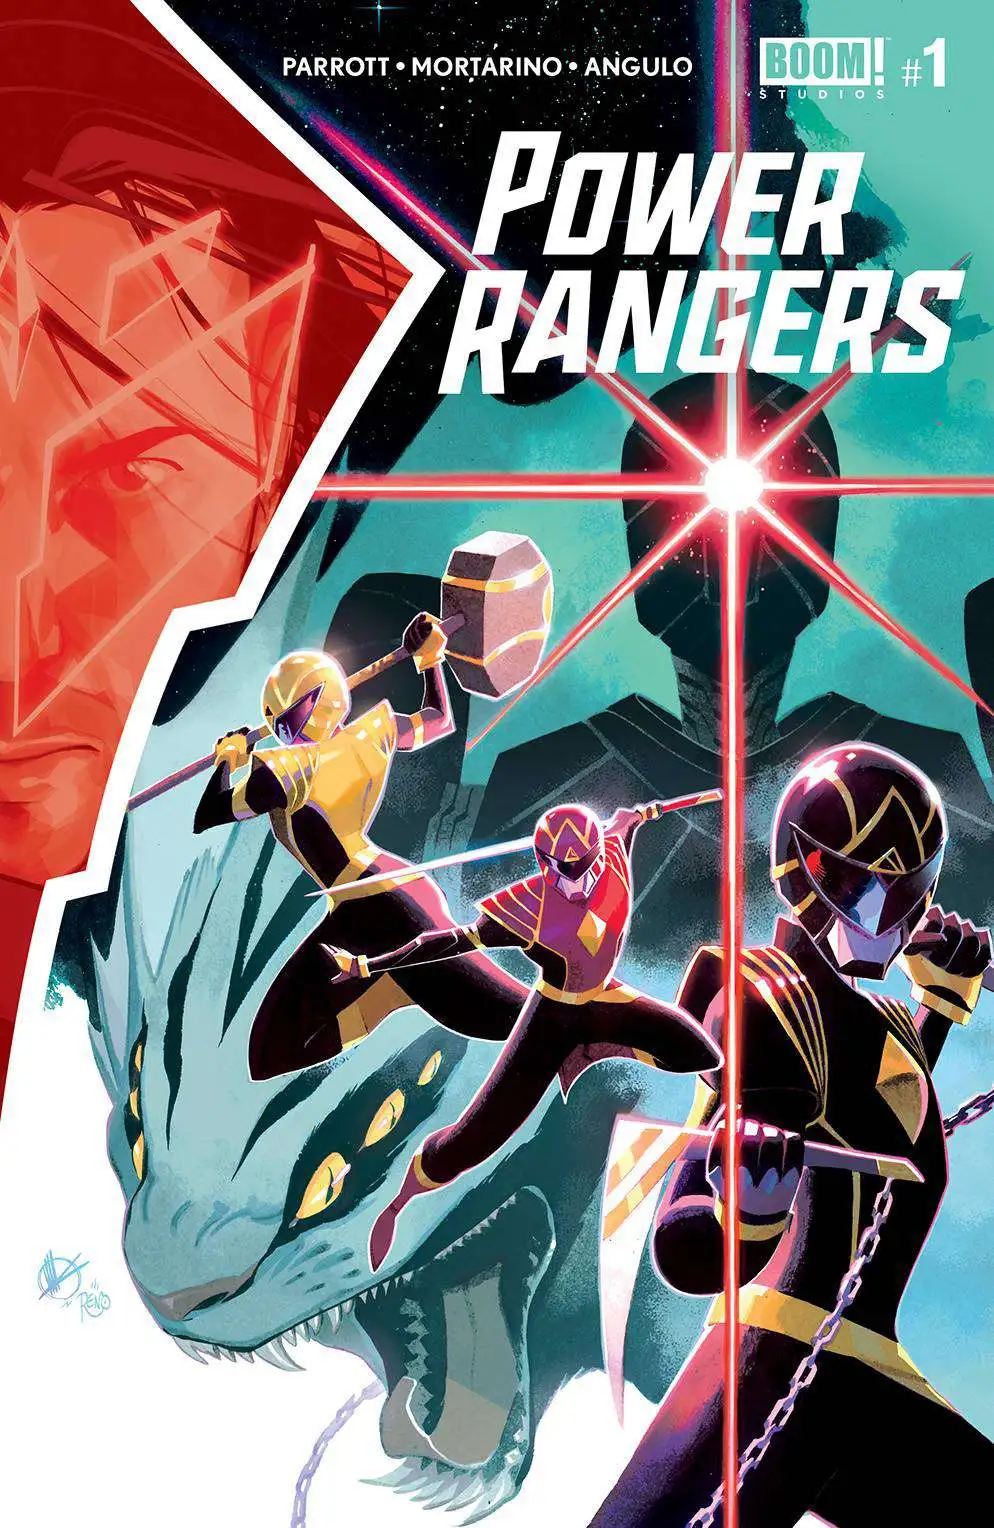 2021 POWER RANGERS #6 1ST PRINTING VARIANT COVER B LEGACY DI NICUOLO COVER 